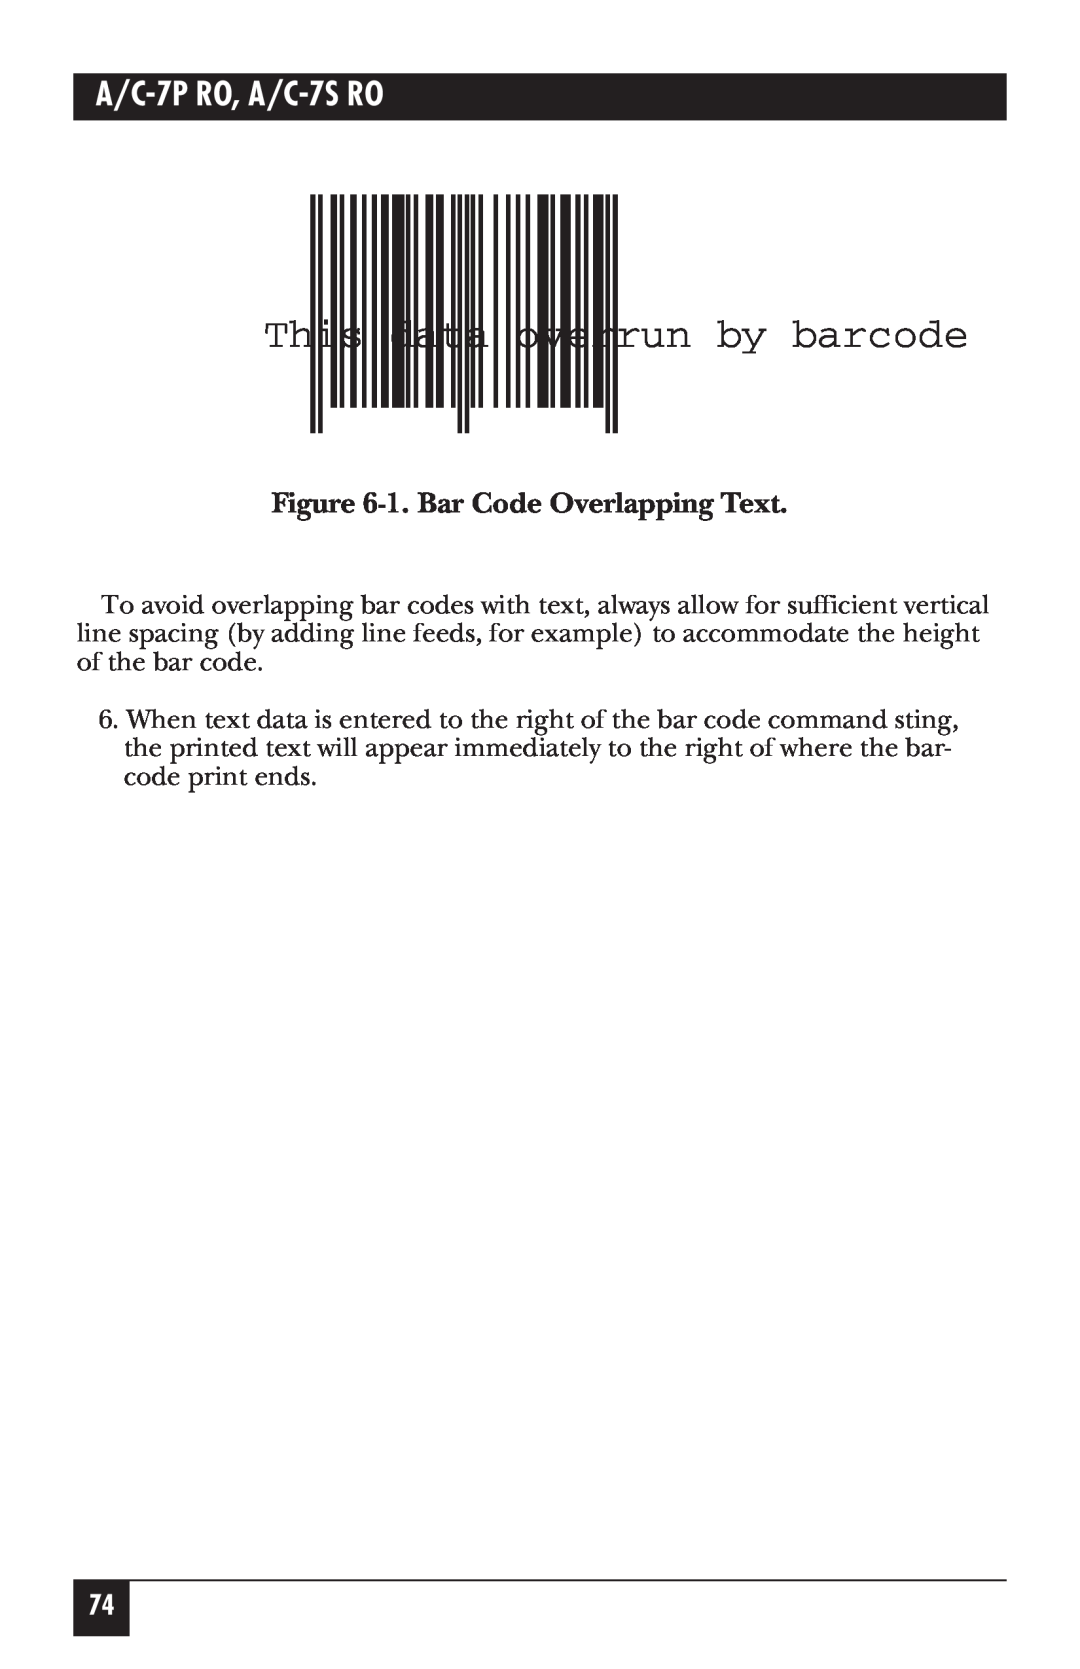 Black Box manual 1. Bar Code Overlapping Text, This data overrun by barcode, A/C-7P RO, A/C-7S RO 